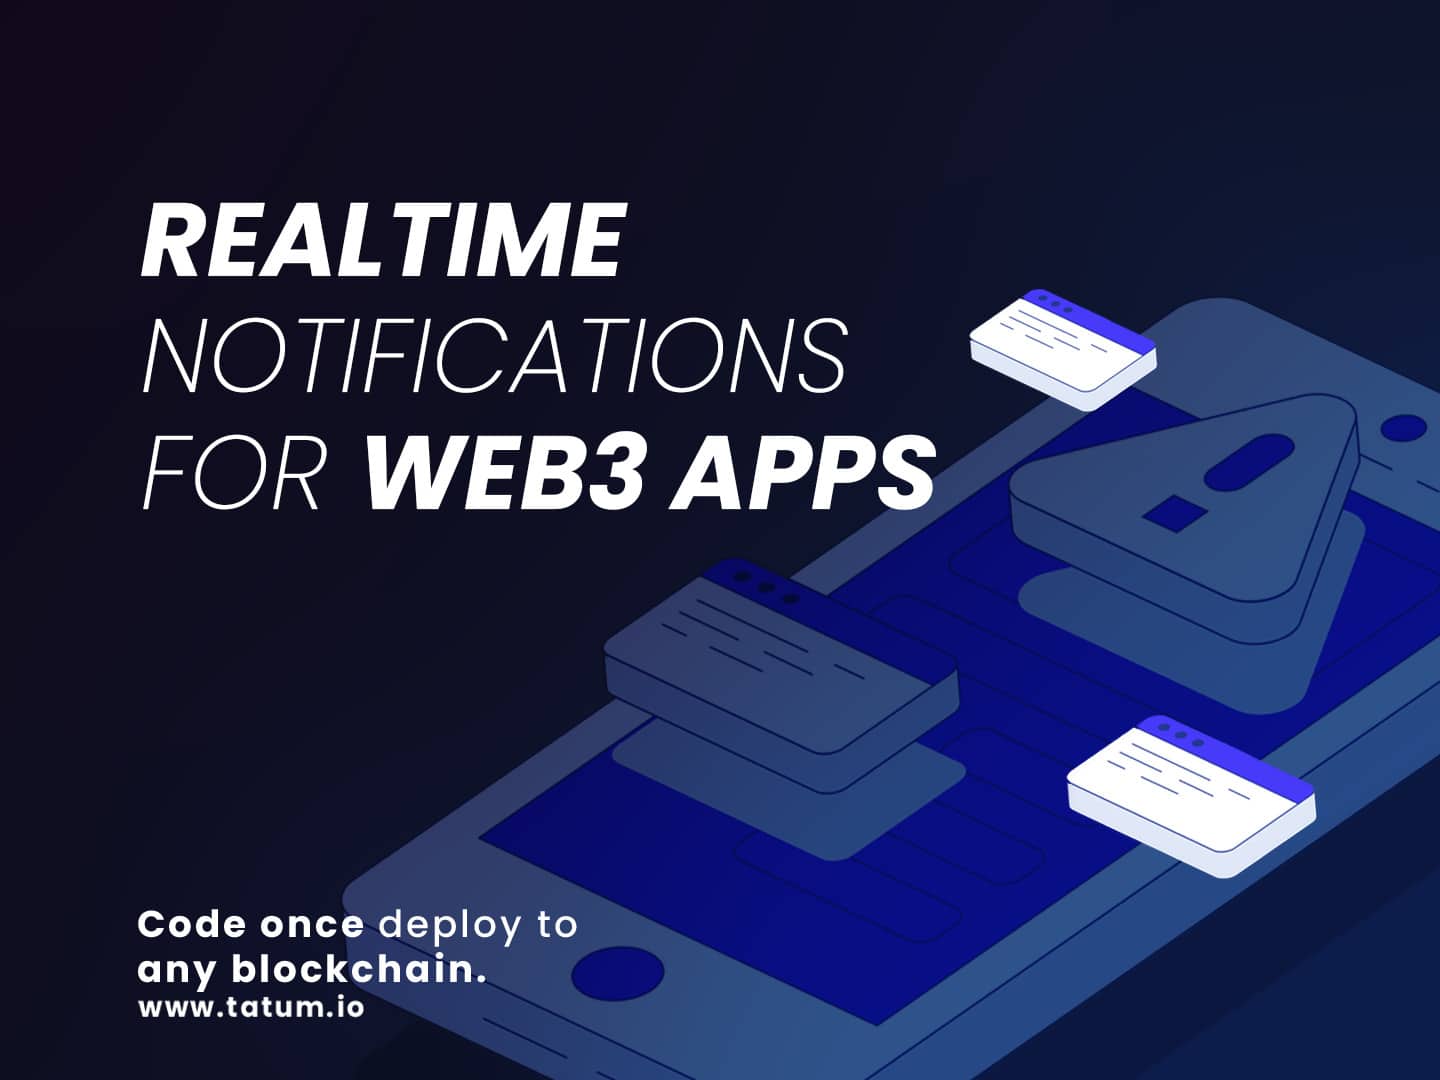 Tatum Modernizes Web3 User Experience, Introducing Real-time Alerts on More than 10 Blockchains